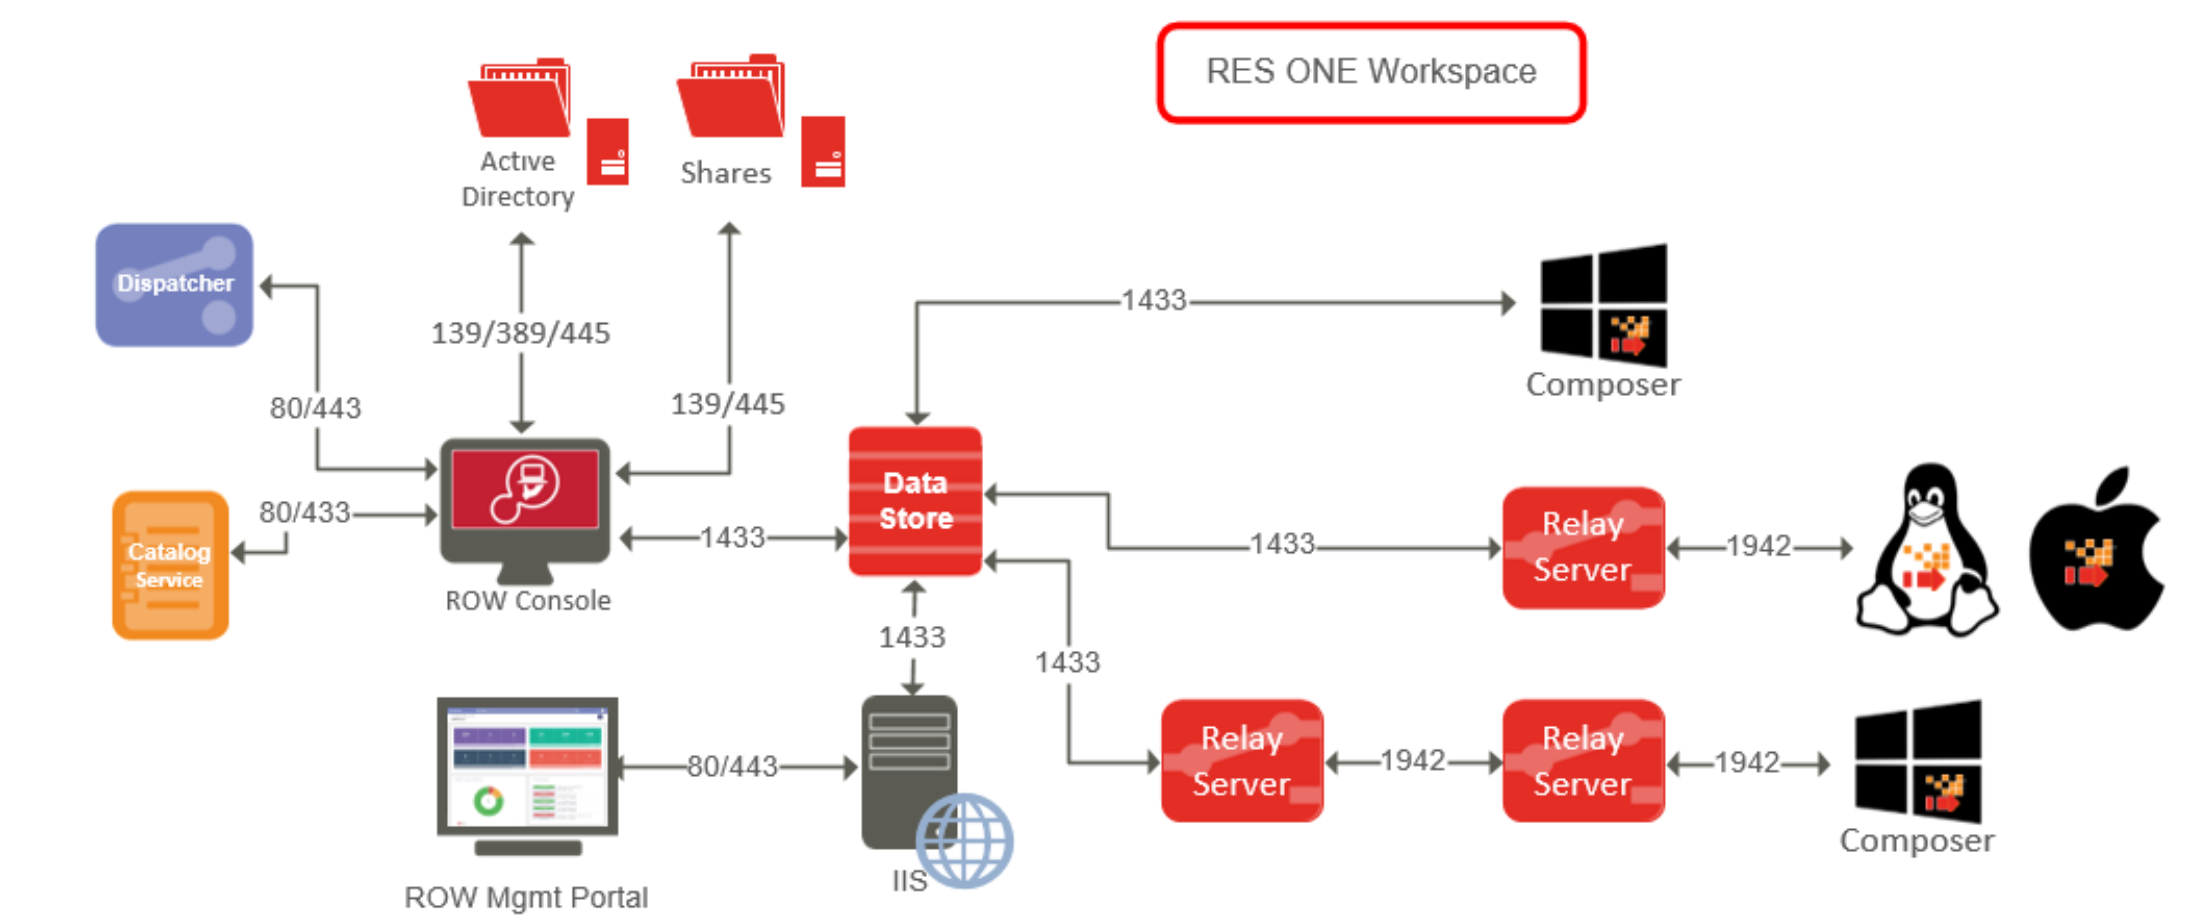 res one workspace manager